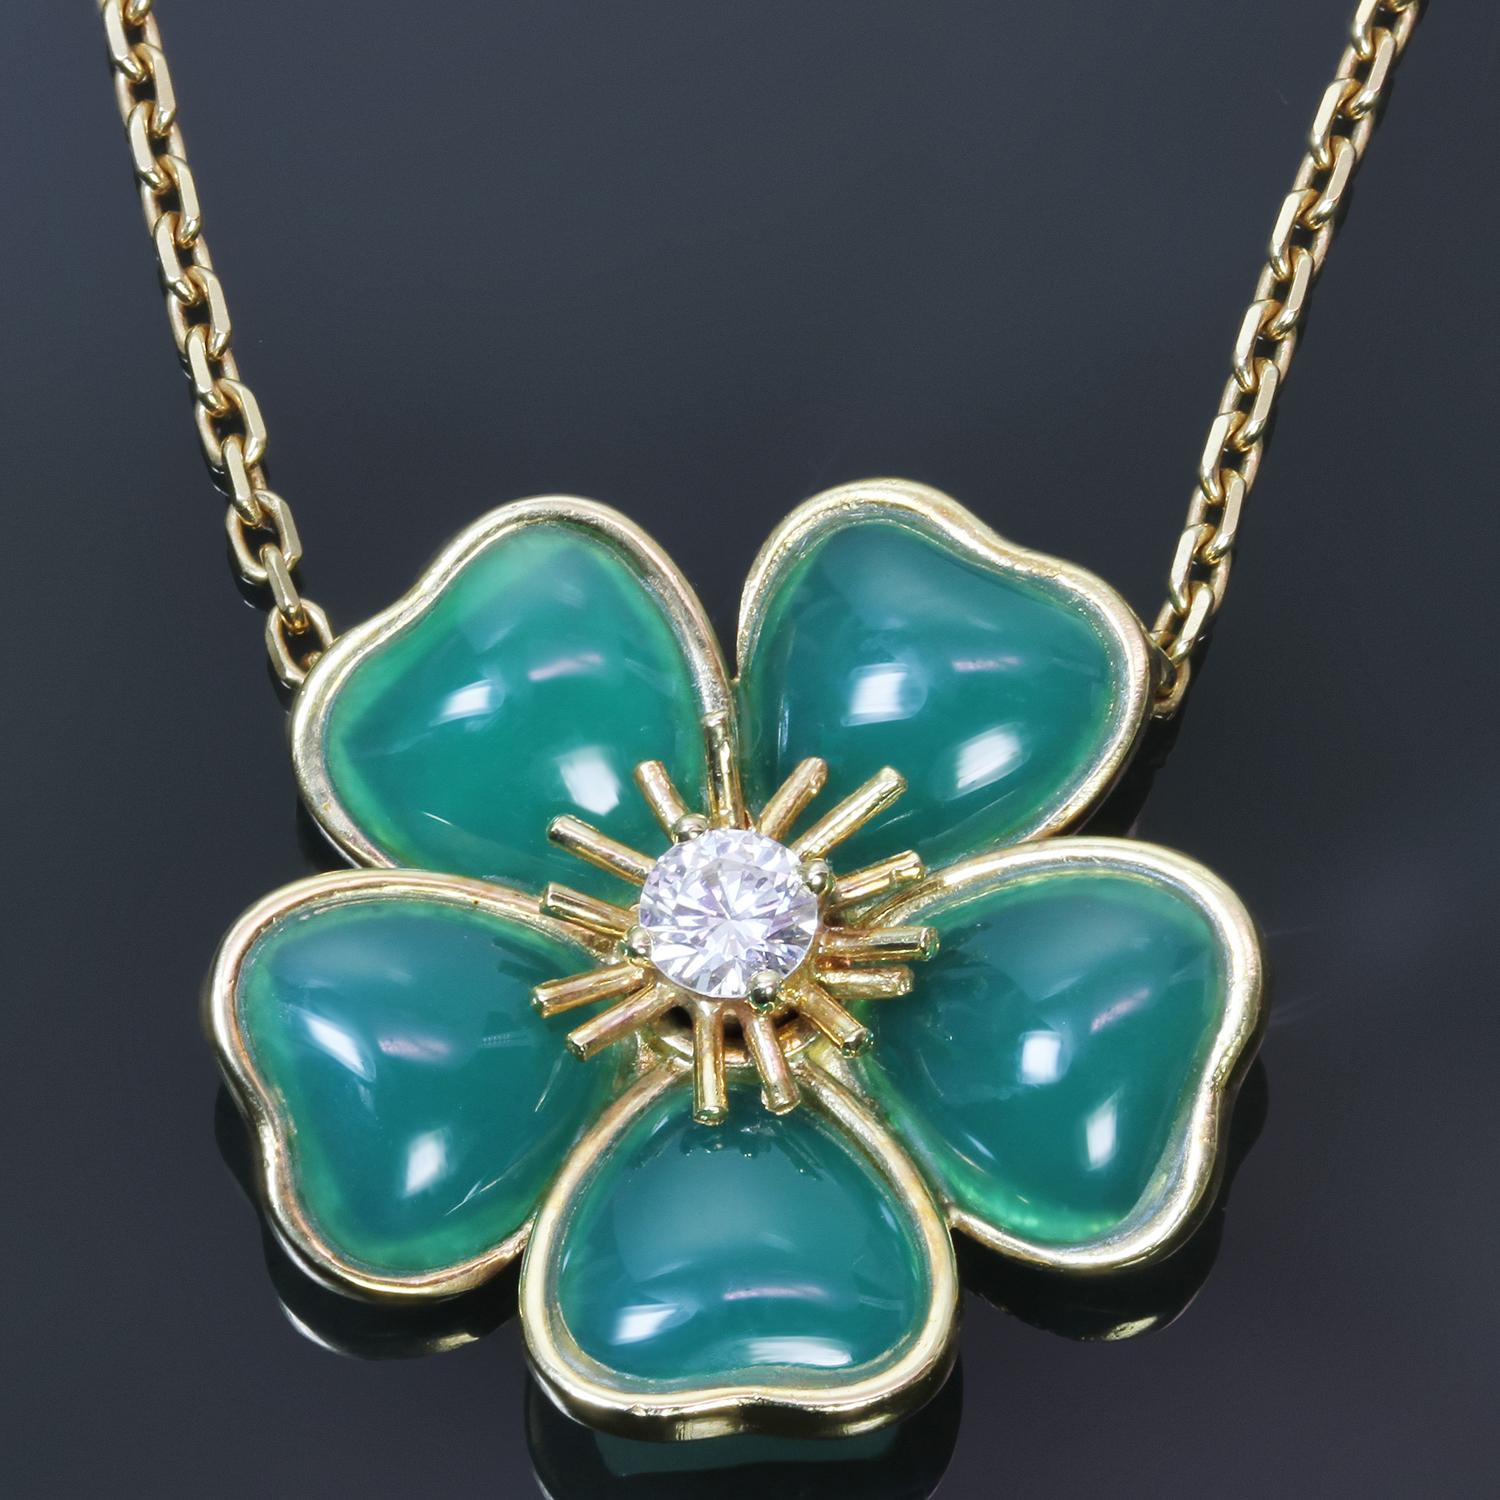 This exquisite authentic vintage Van Cleef & Arpels necklace is from the elegant Nerval collection and features a 5-petal flower crafted in 18k yellow gold and green chalcedony and prong-set with a solitaire brilliant-cut round E-F-G VVS1-VVS2